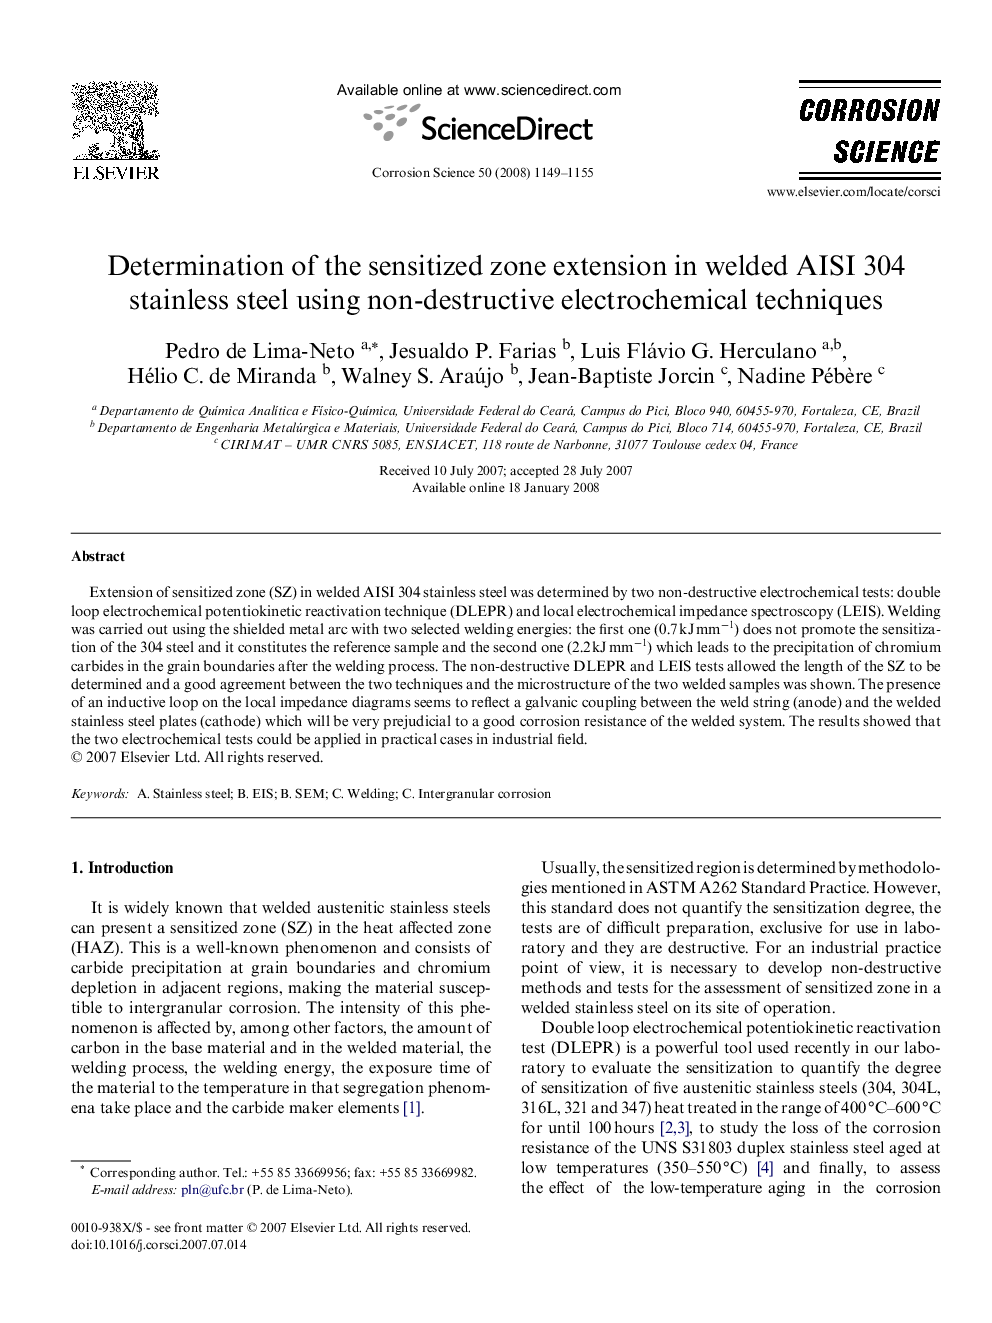 Determination of the sensitized zone extension in welded AISI 304 stainless steel using non-destructive electrochemical techniques